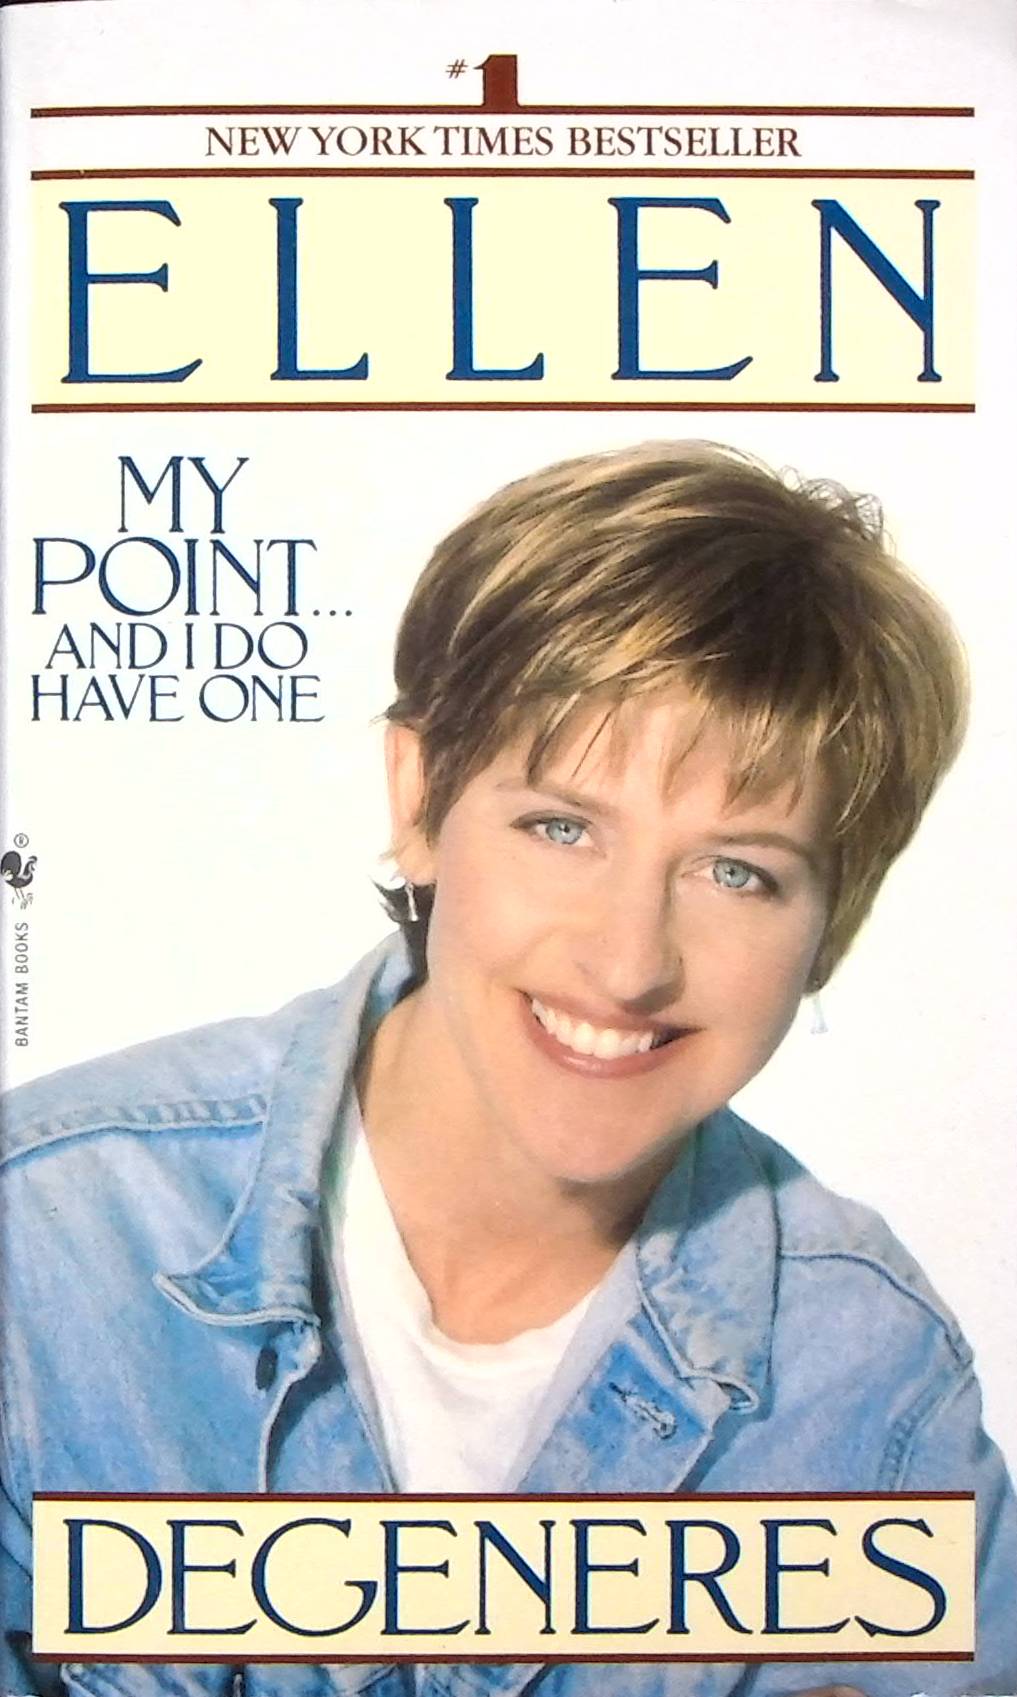 My Point.and I Do Have One - Degeneres, Ellen (Author)